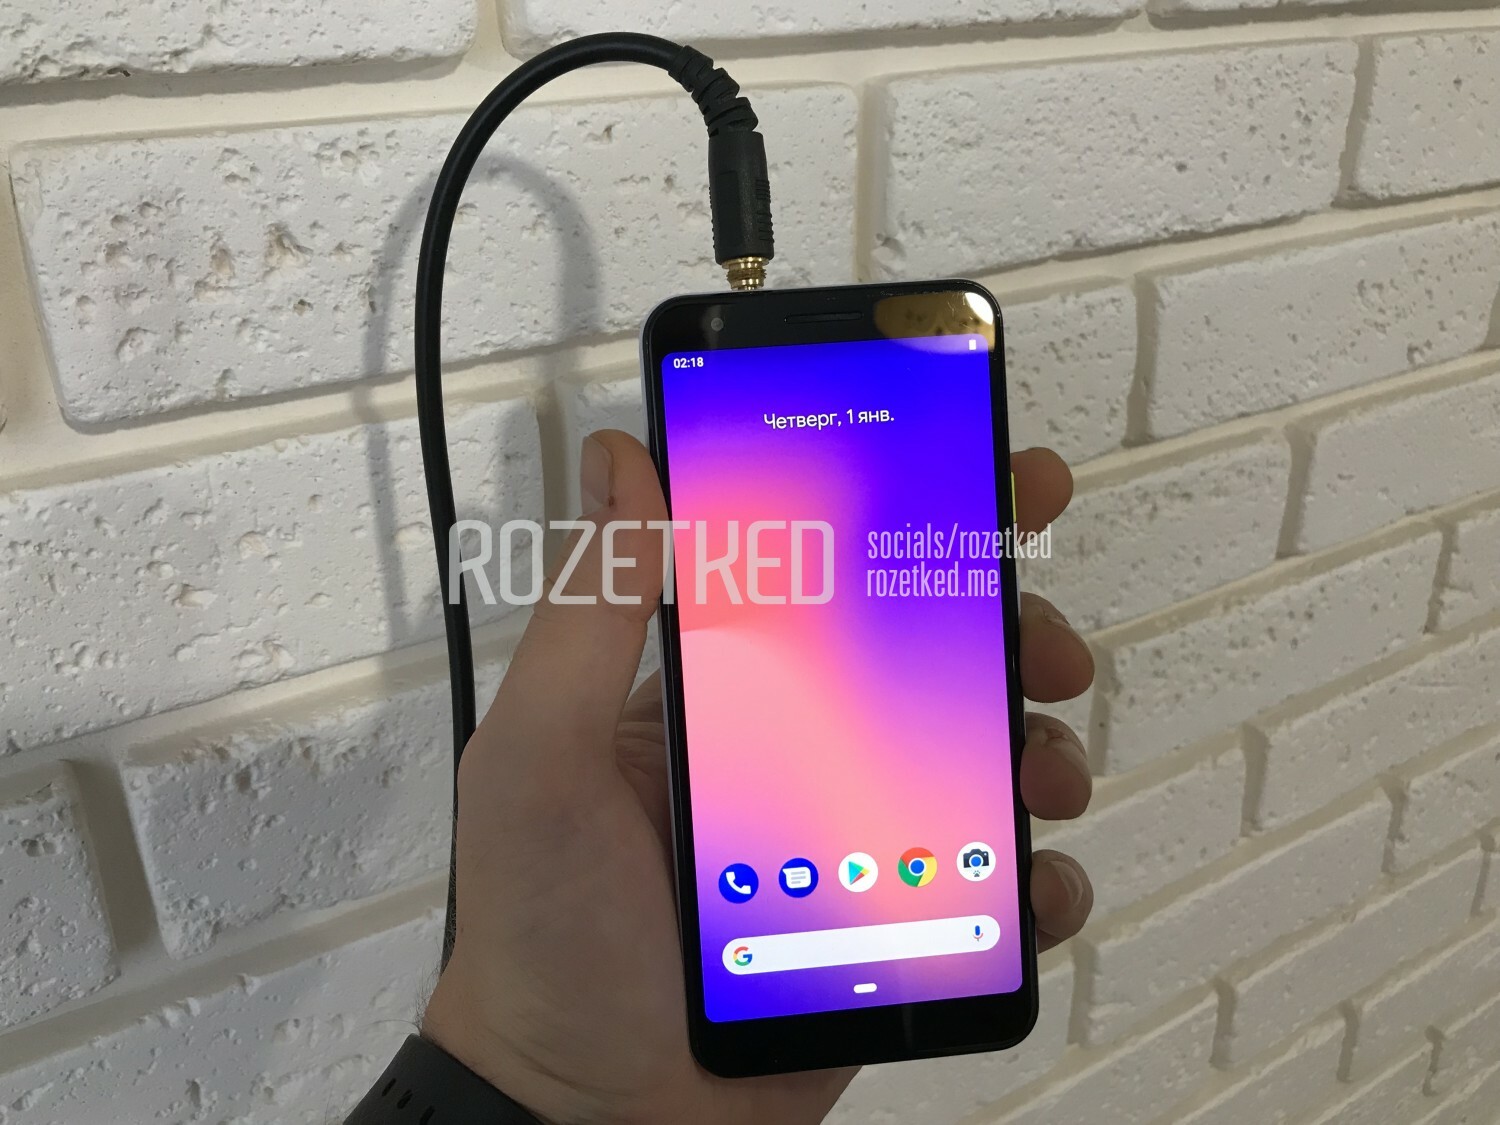 Is there anything else I should know about the Google Pixel 3a?